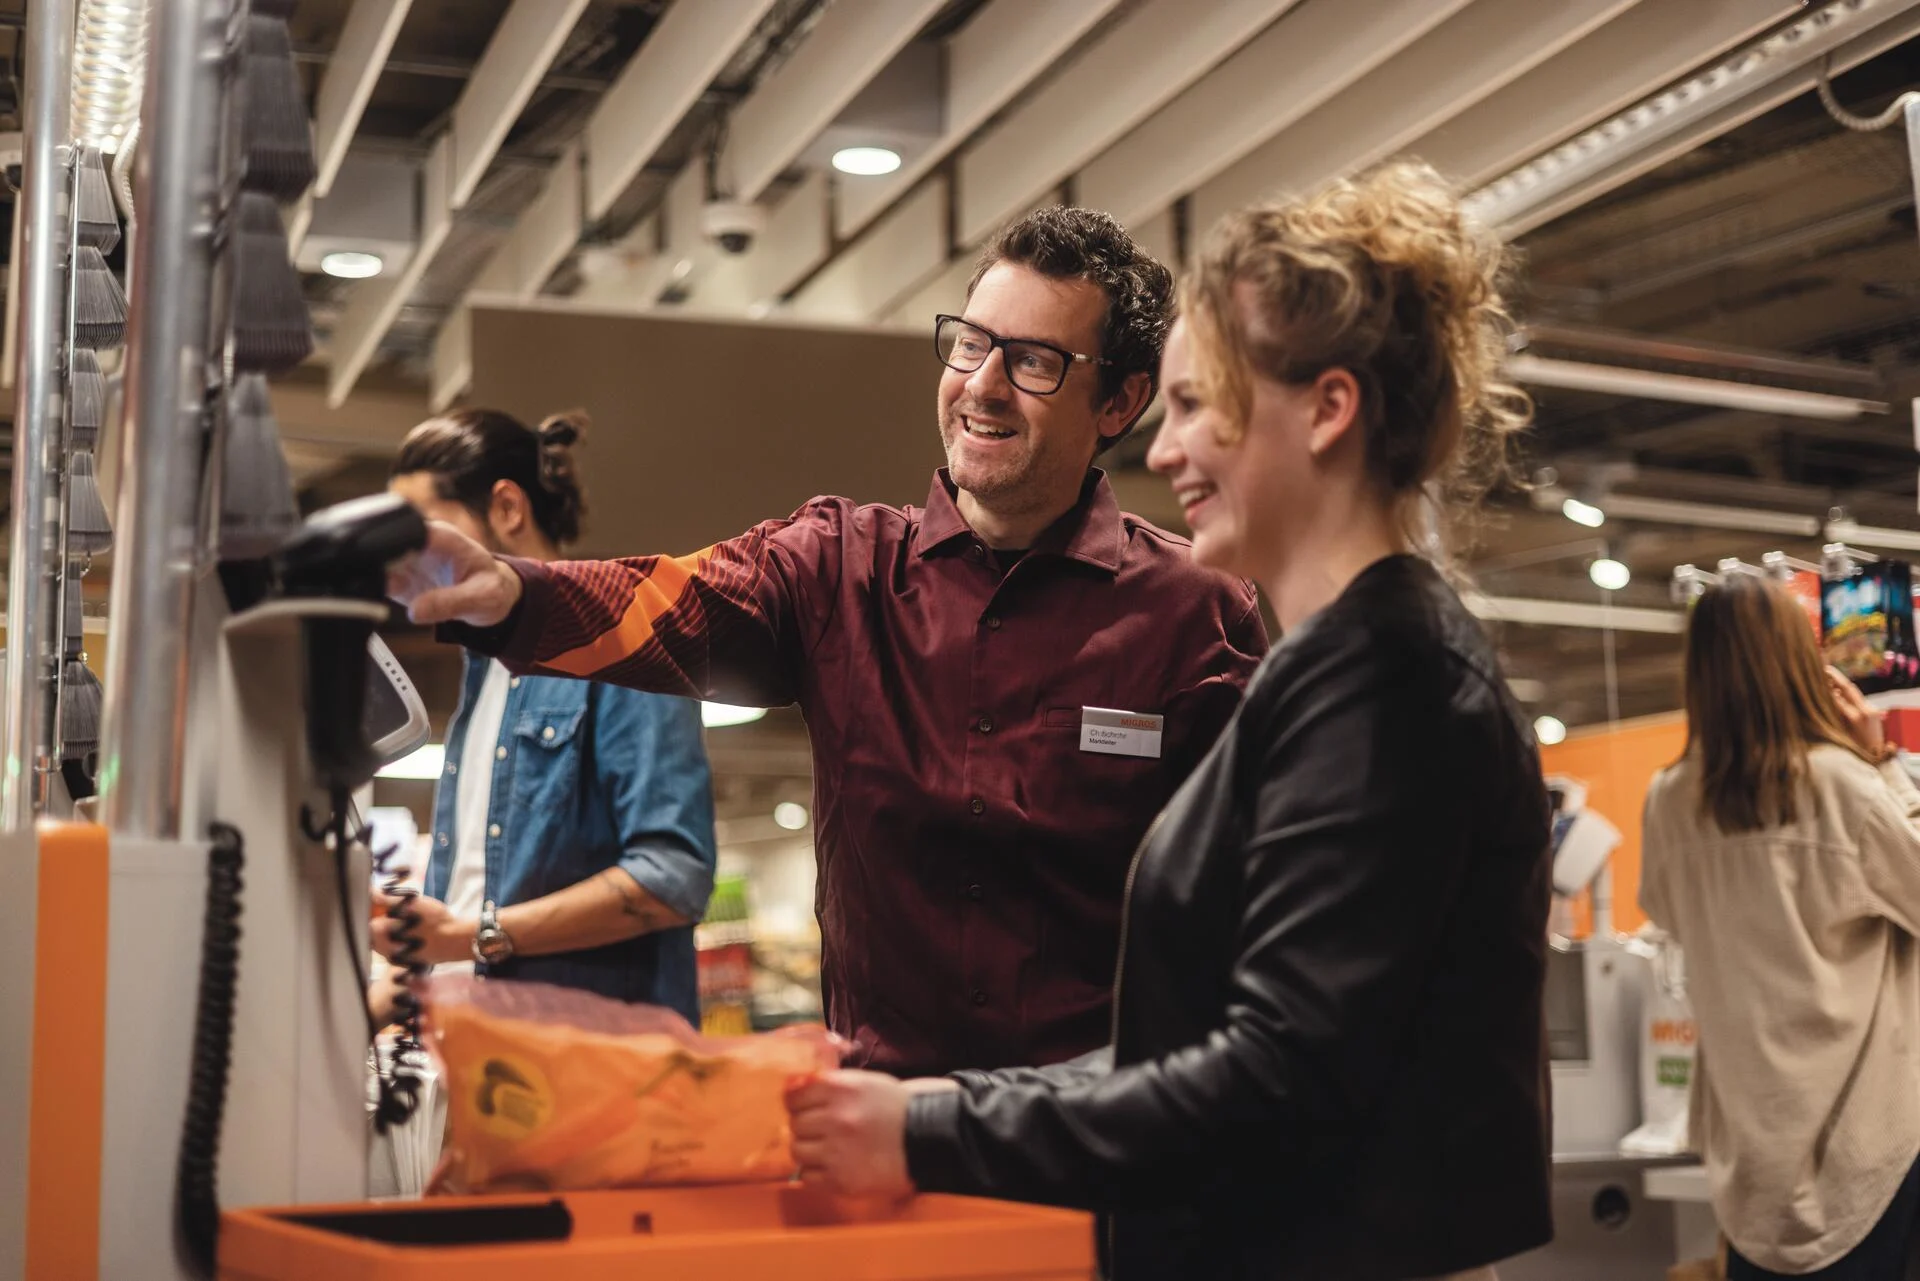 An employee in a Migros store helps a customer at a self-scanning checkout.